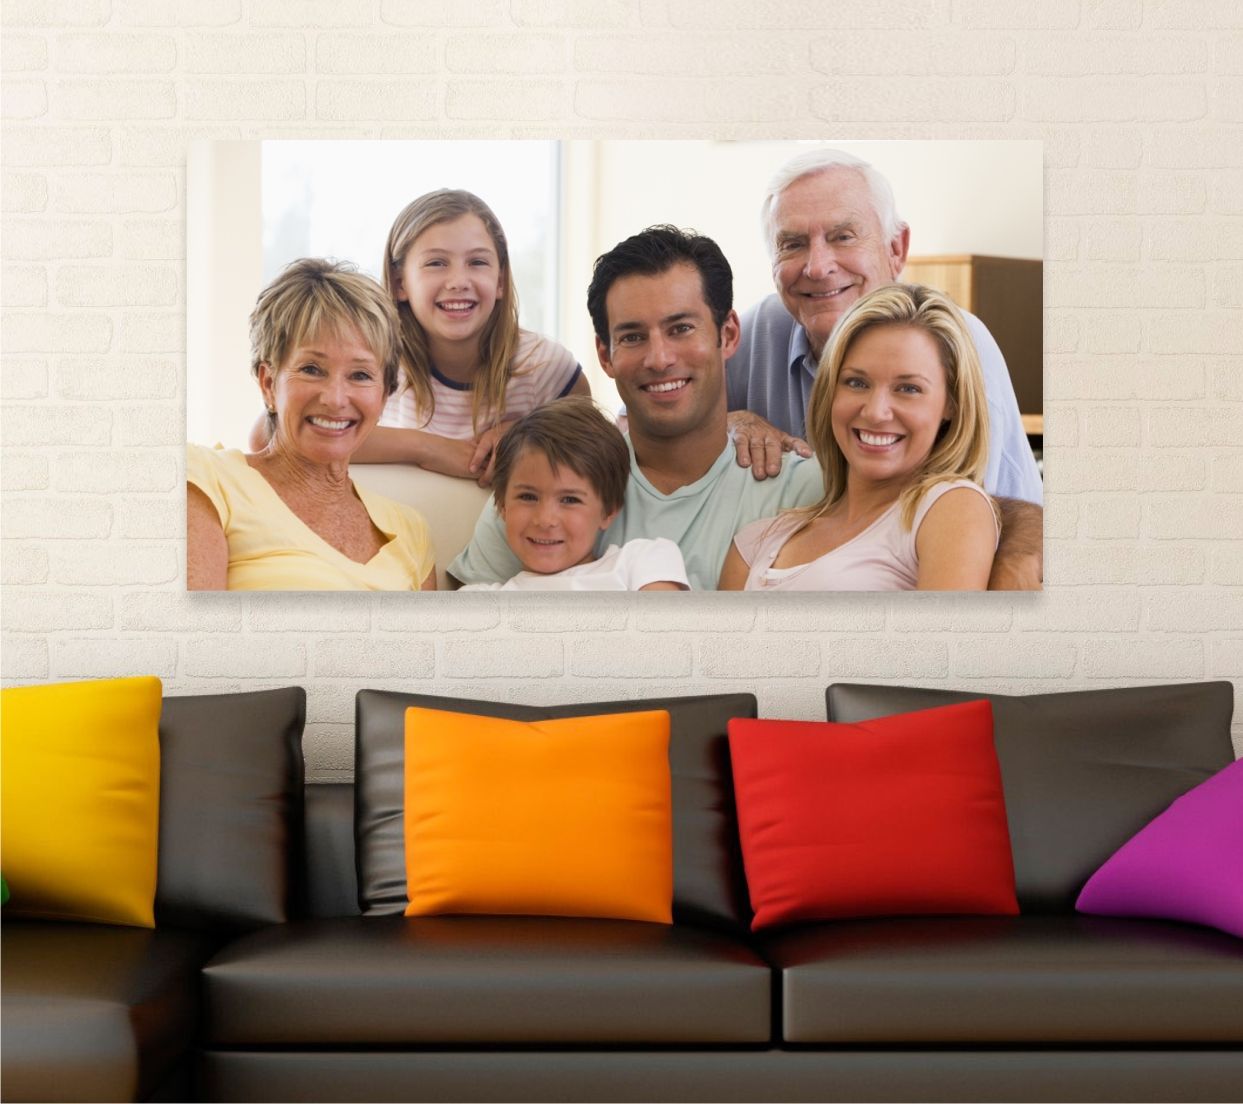 Family Portraits custom printed on canvas gallery wraps